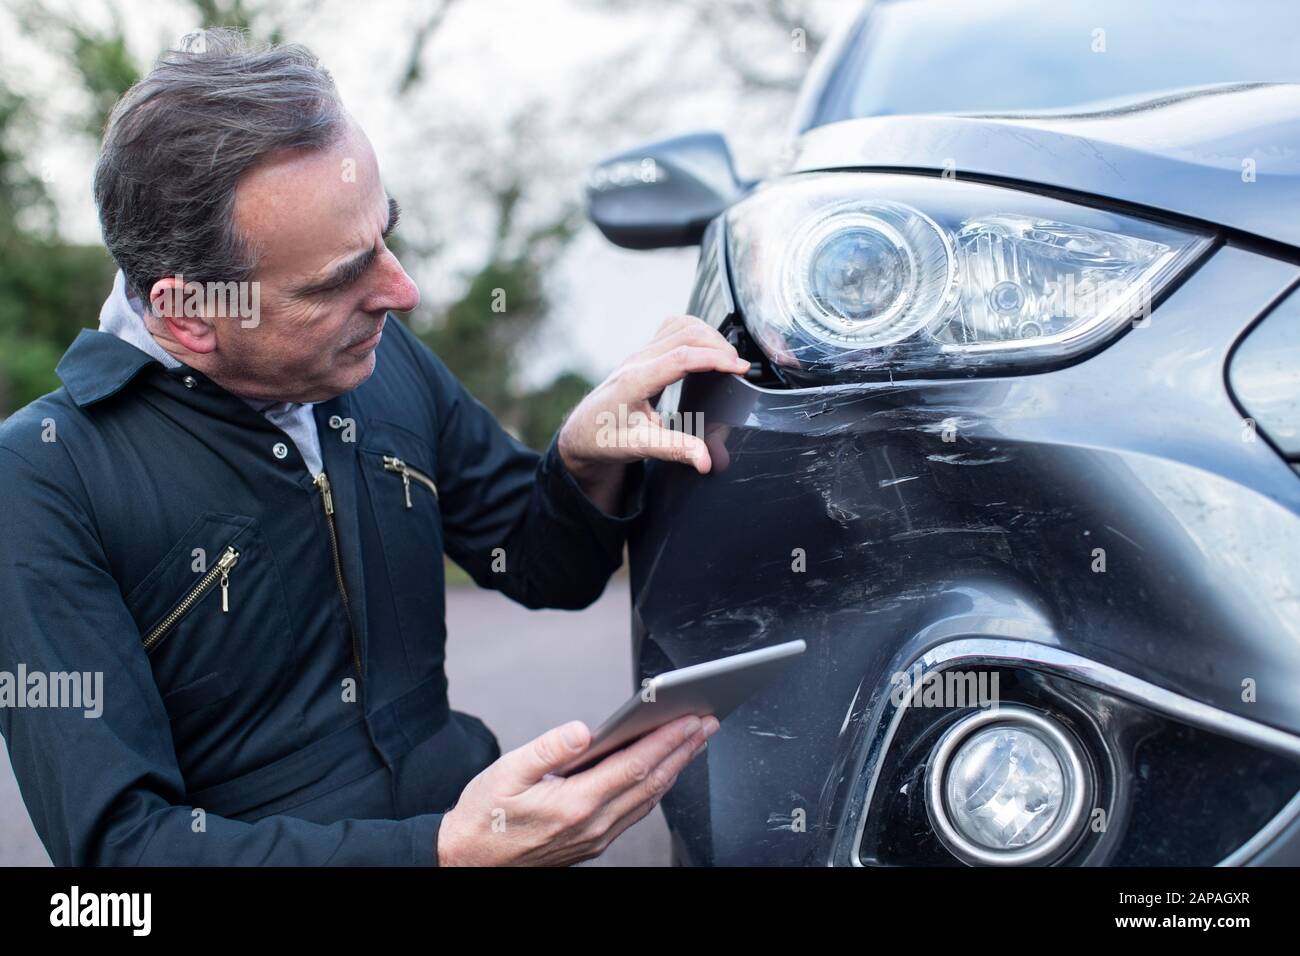 Auto Workshop Mechanic Inspecting Damage To Car And Filling In Repair Using Digital Tablet Stock Photo